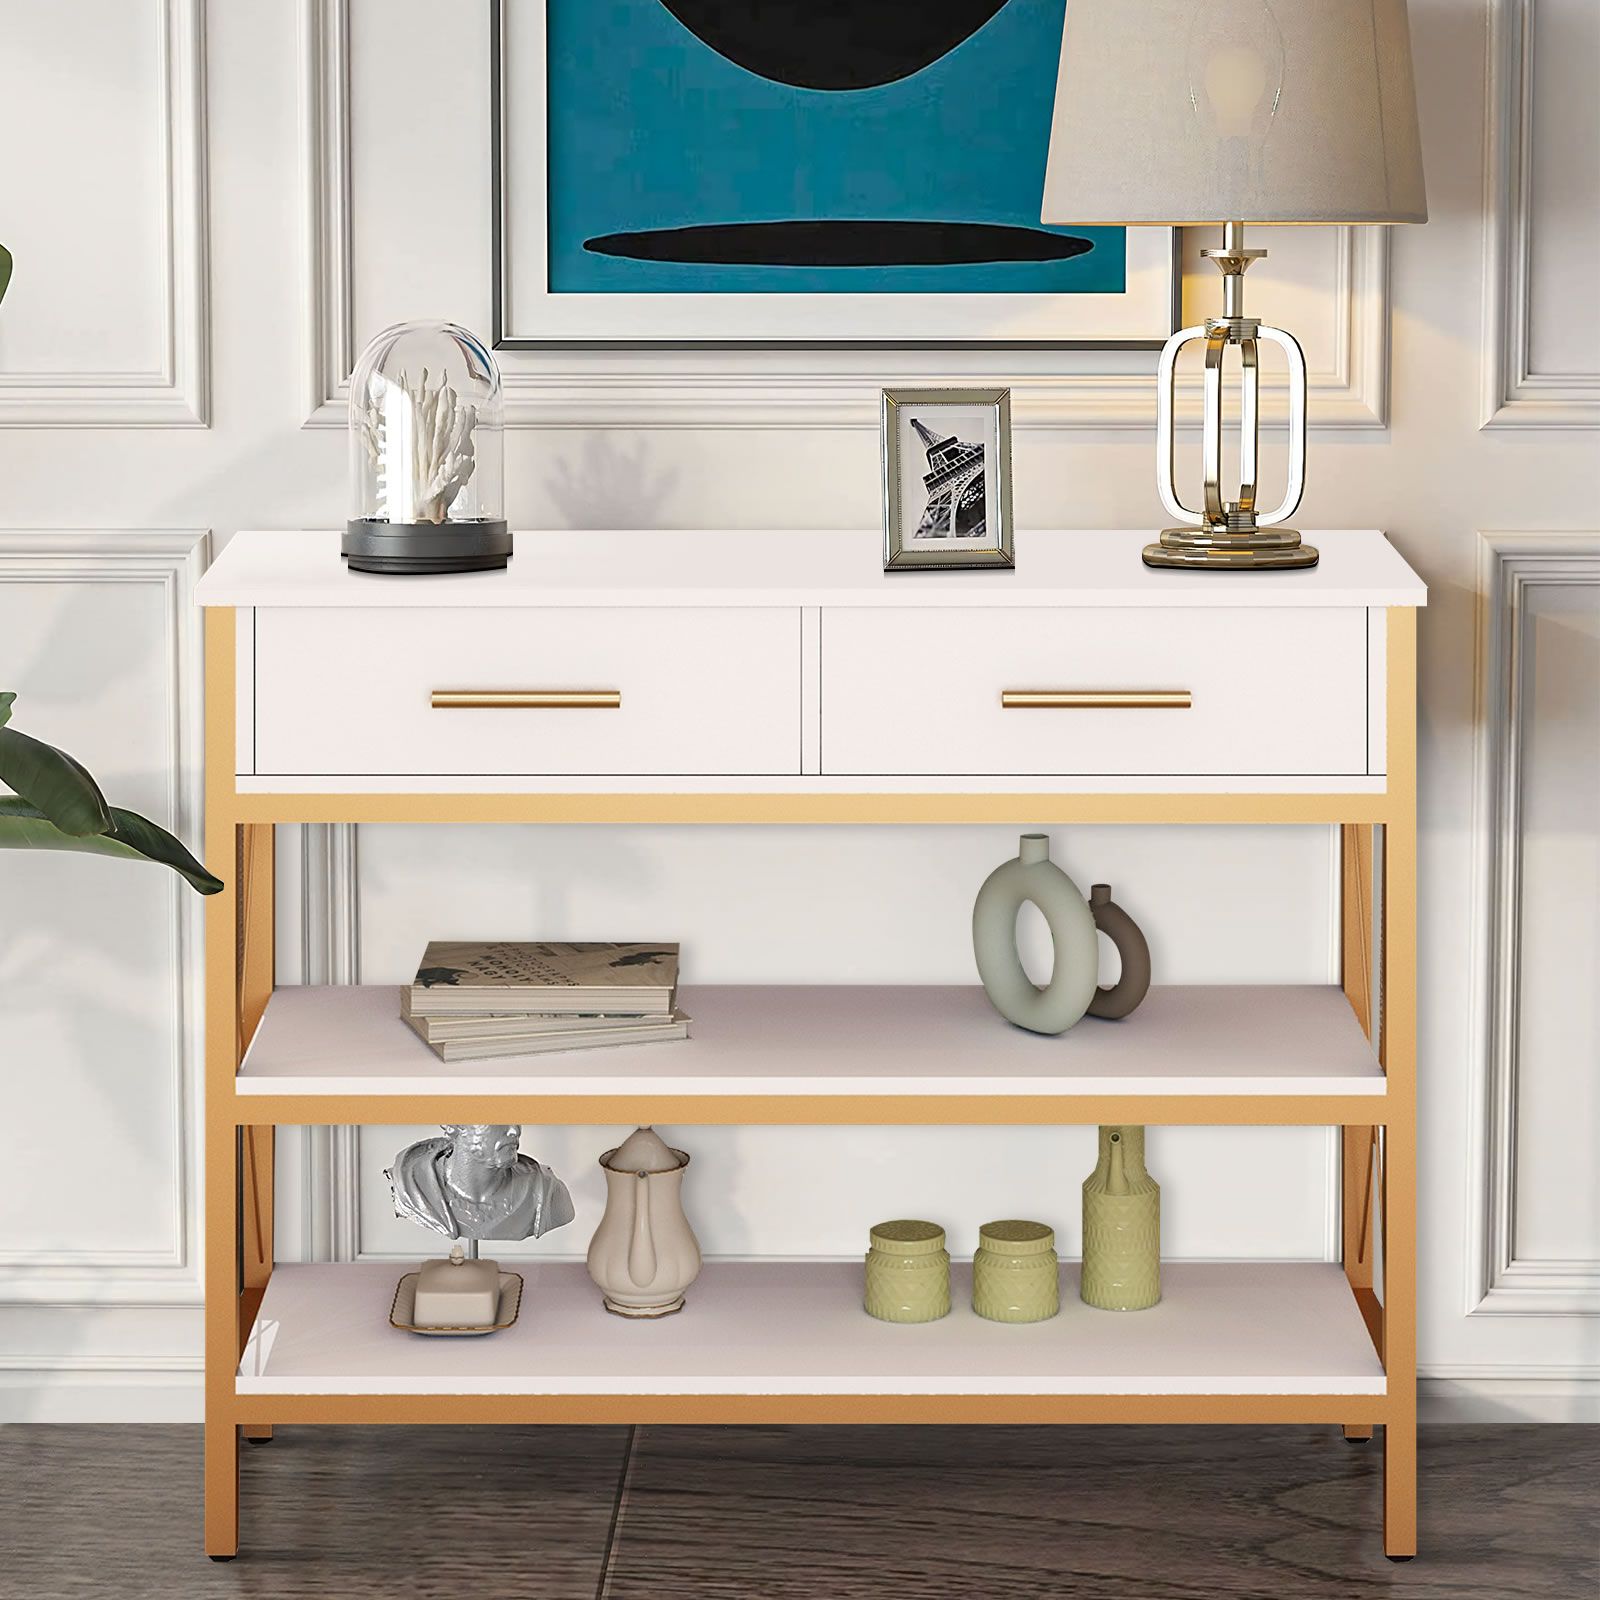 Modern Console Table TV Cabinet Hall Entryway Bar Side Sofa Narrow Long Storage Shelves Drawers Wooden Accent 100x30x80cm